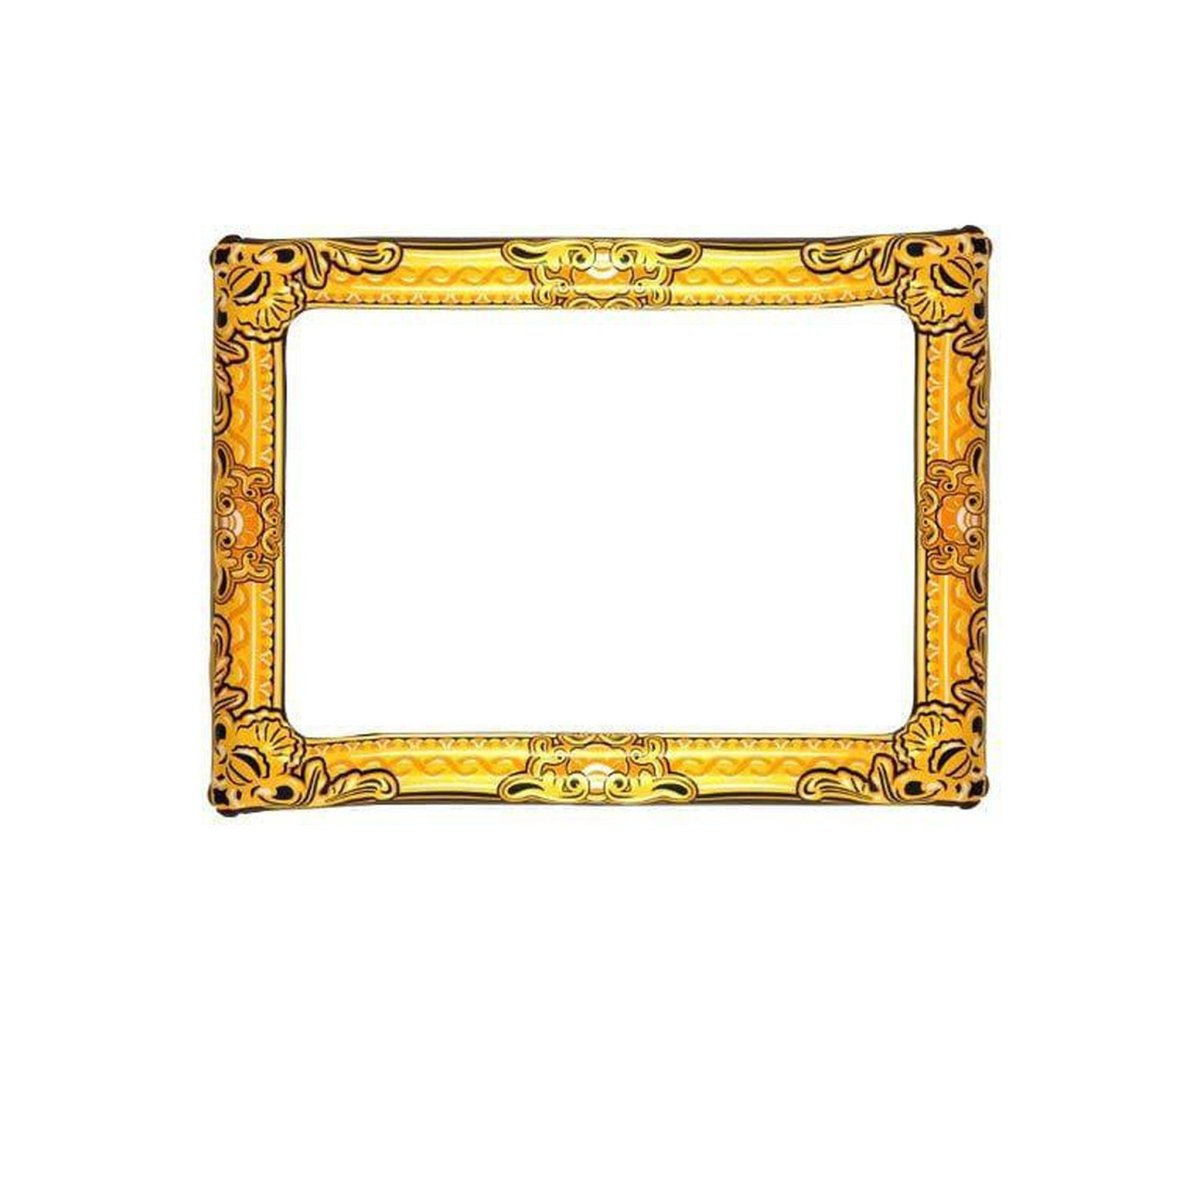 Inflatable Picture Frame in Gold (60cm x 80cm) - Kids Party Craft